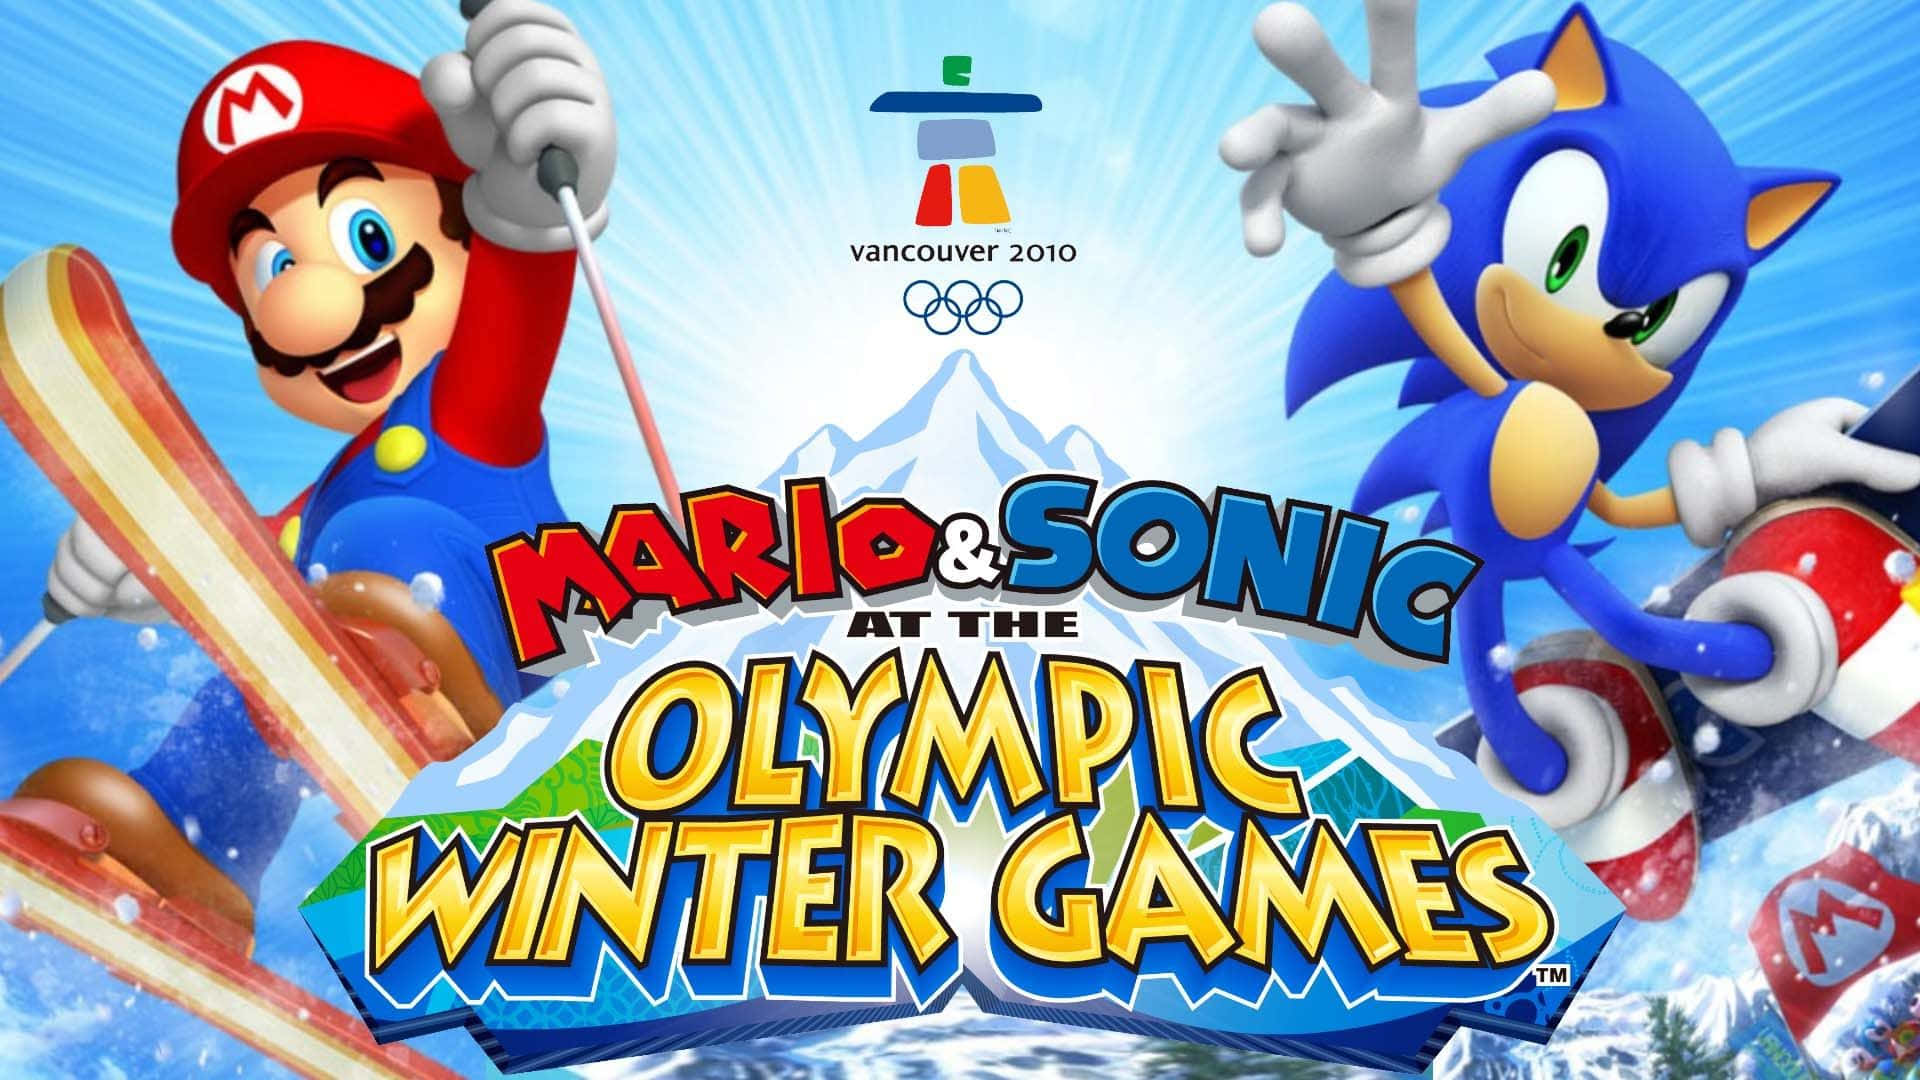 Action-packed Winter Games Wallpaper